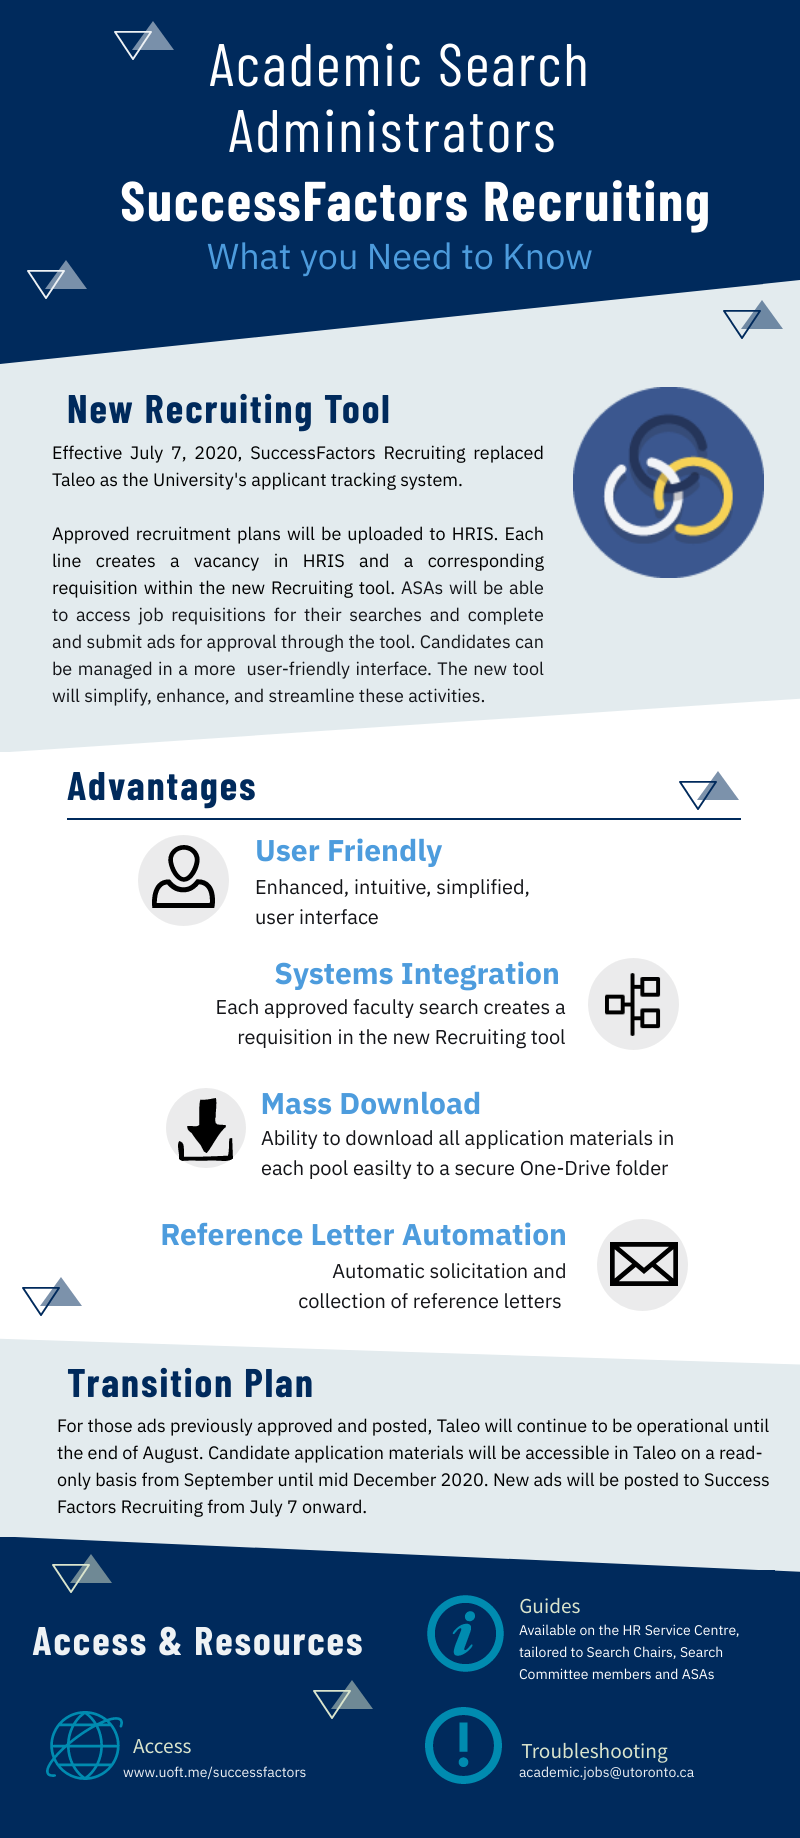 Infographic: SuccessFactors Recruiting for Academic Search Administrators